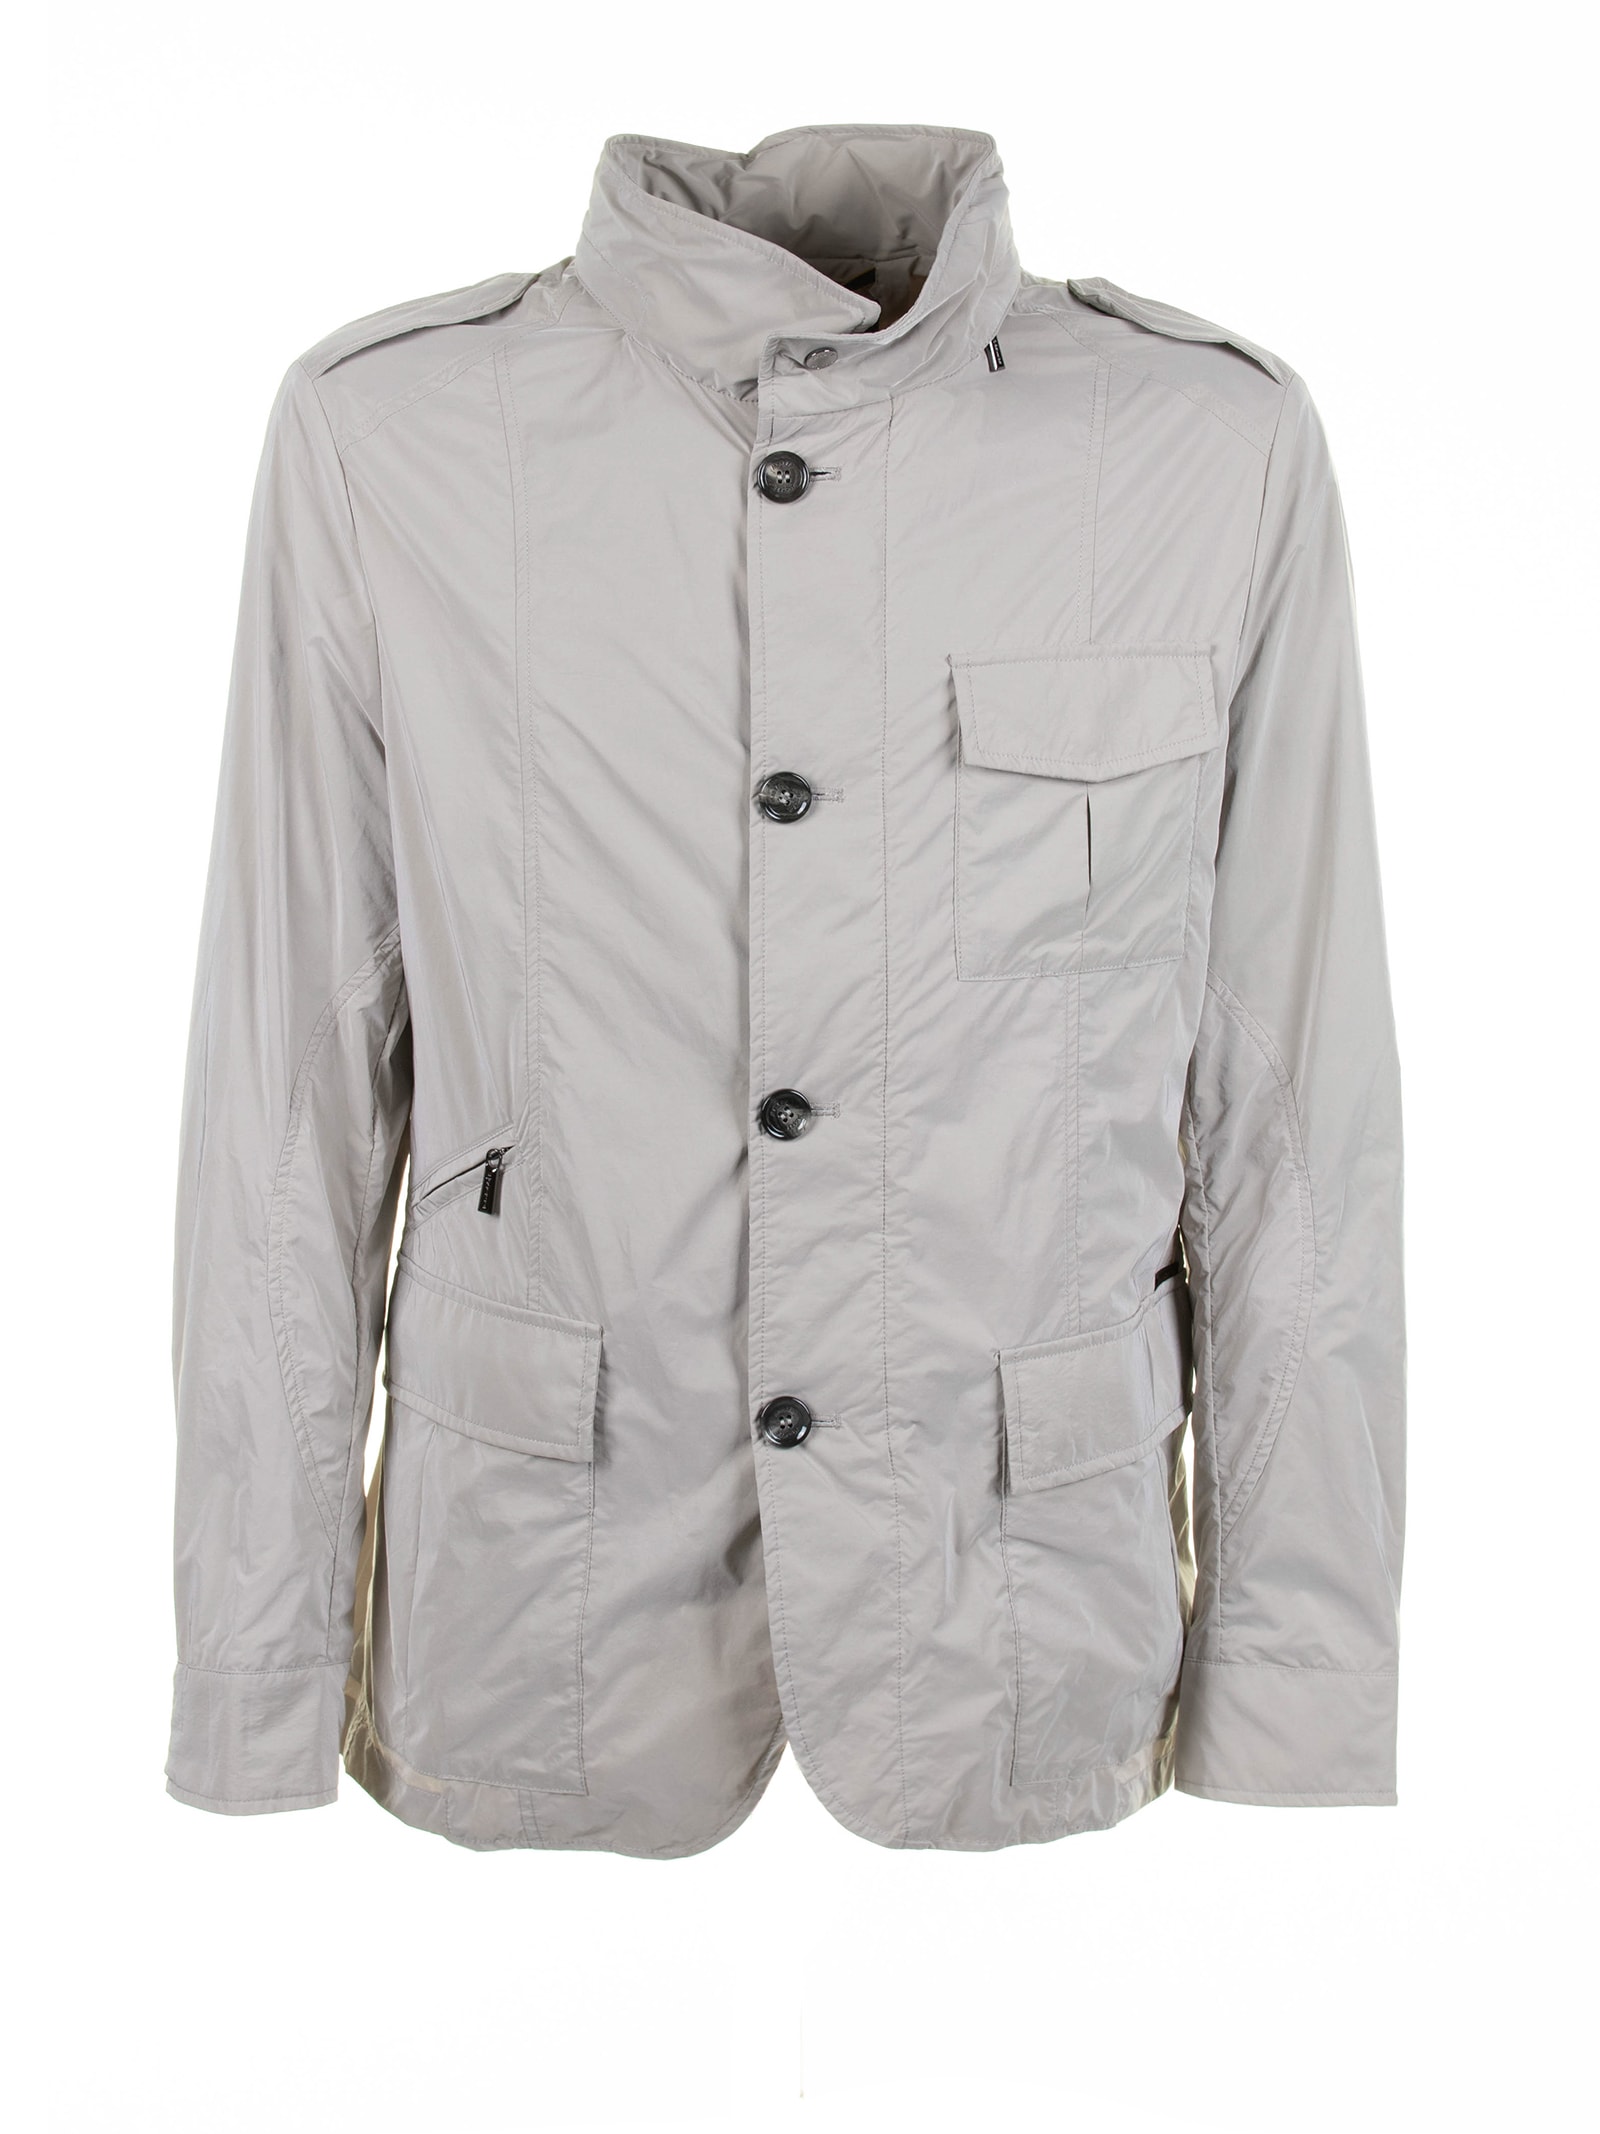 Spring Jacket With Pockets And Buttons